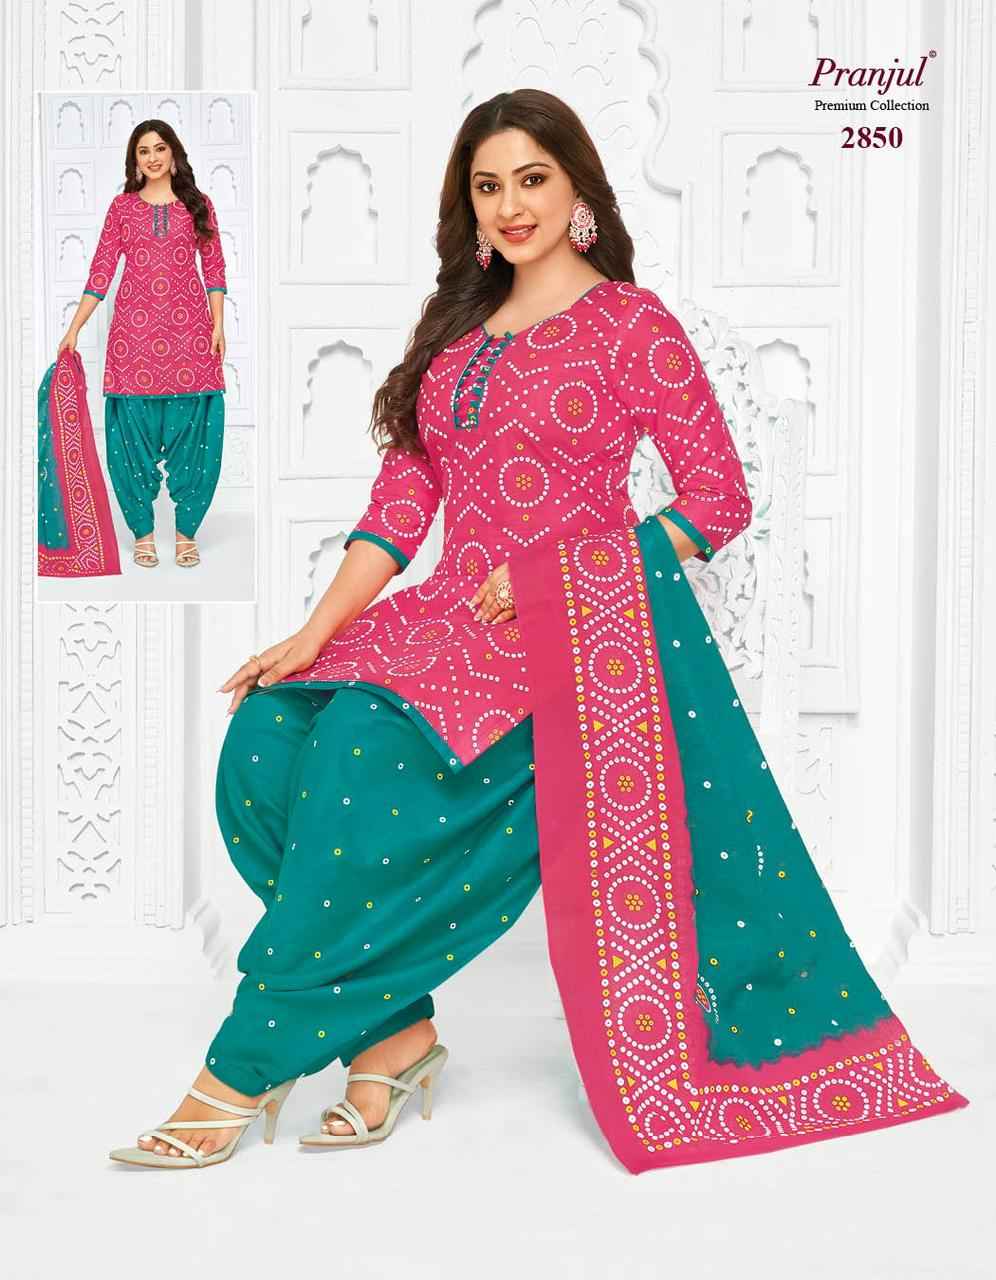 Pranjul Priyanka vol 6 Exclusive Printed Cotton Daily Wear Dress Material  Collection - The Ethnic World